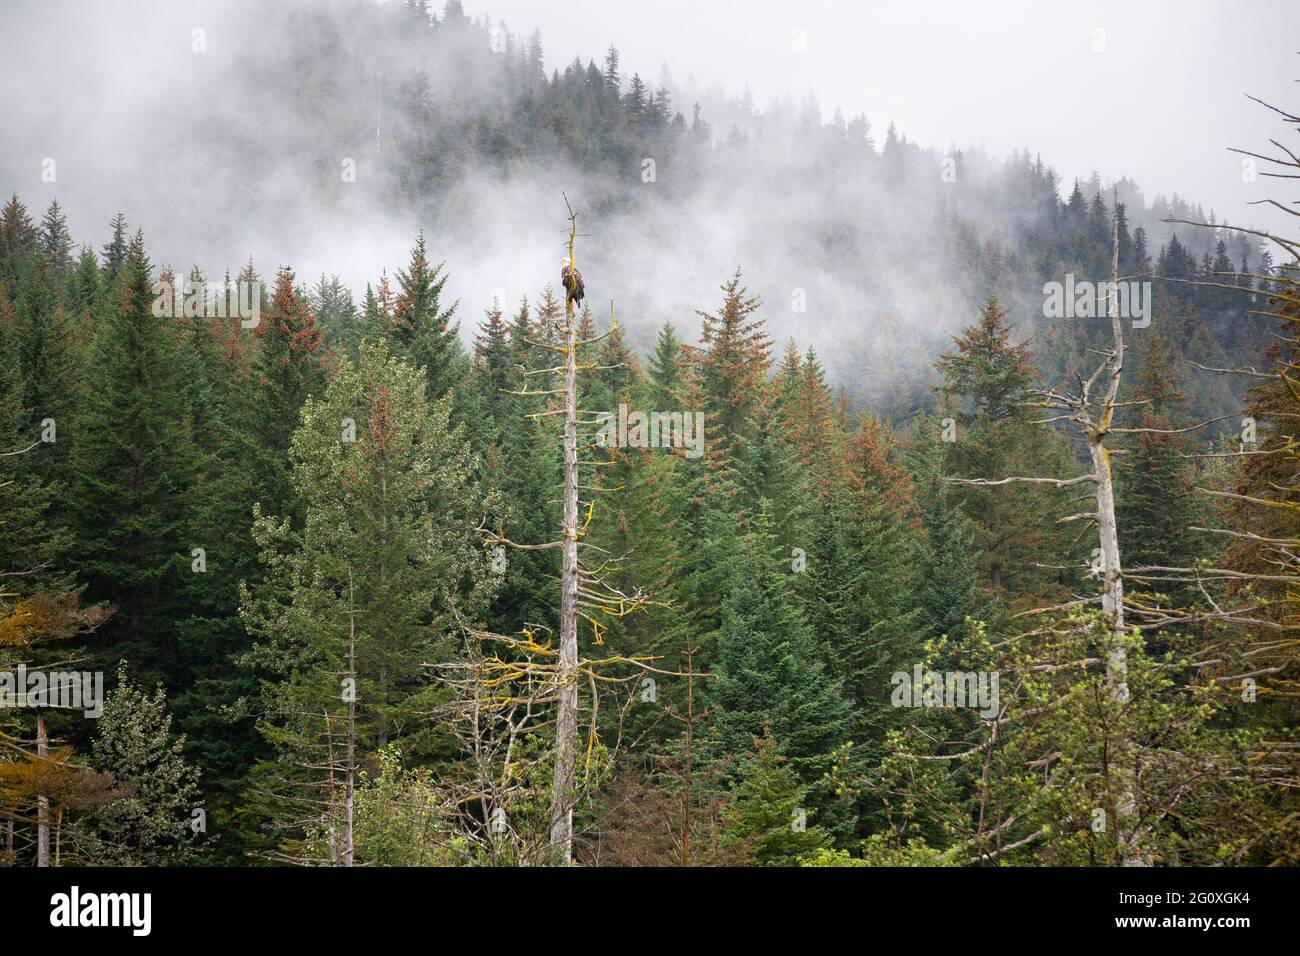 A bald eagle sits in a tall tree among pine trees on a misty day in Alaska Stock Photo